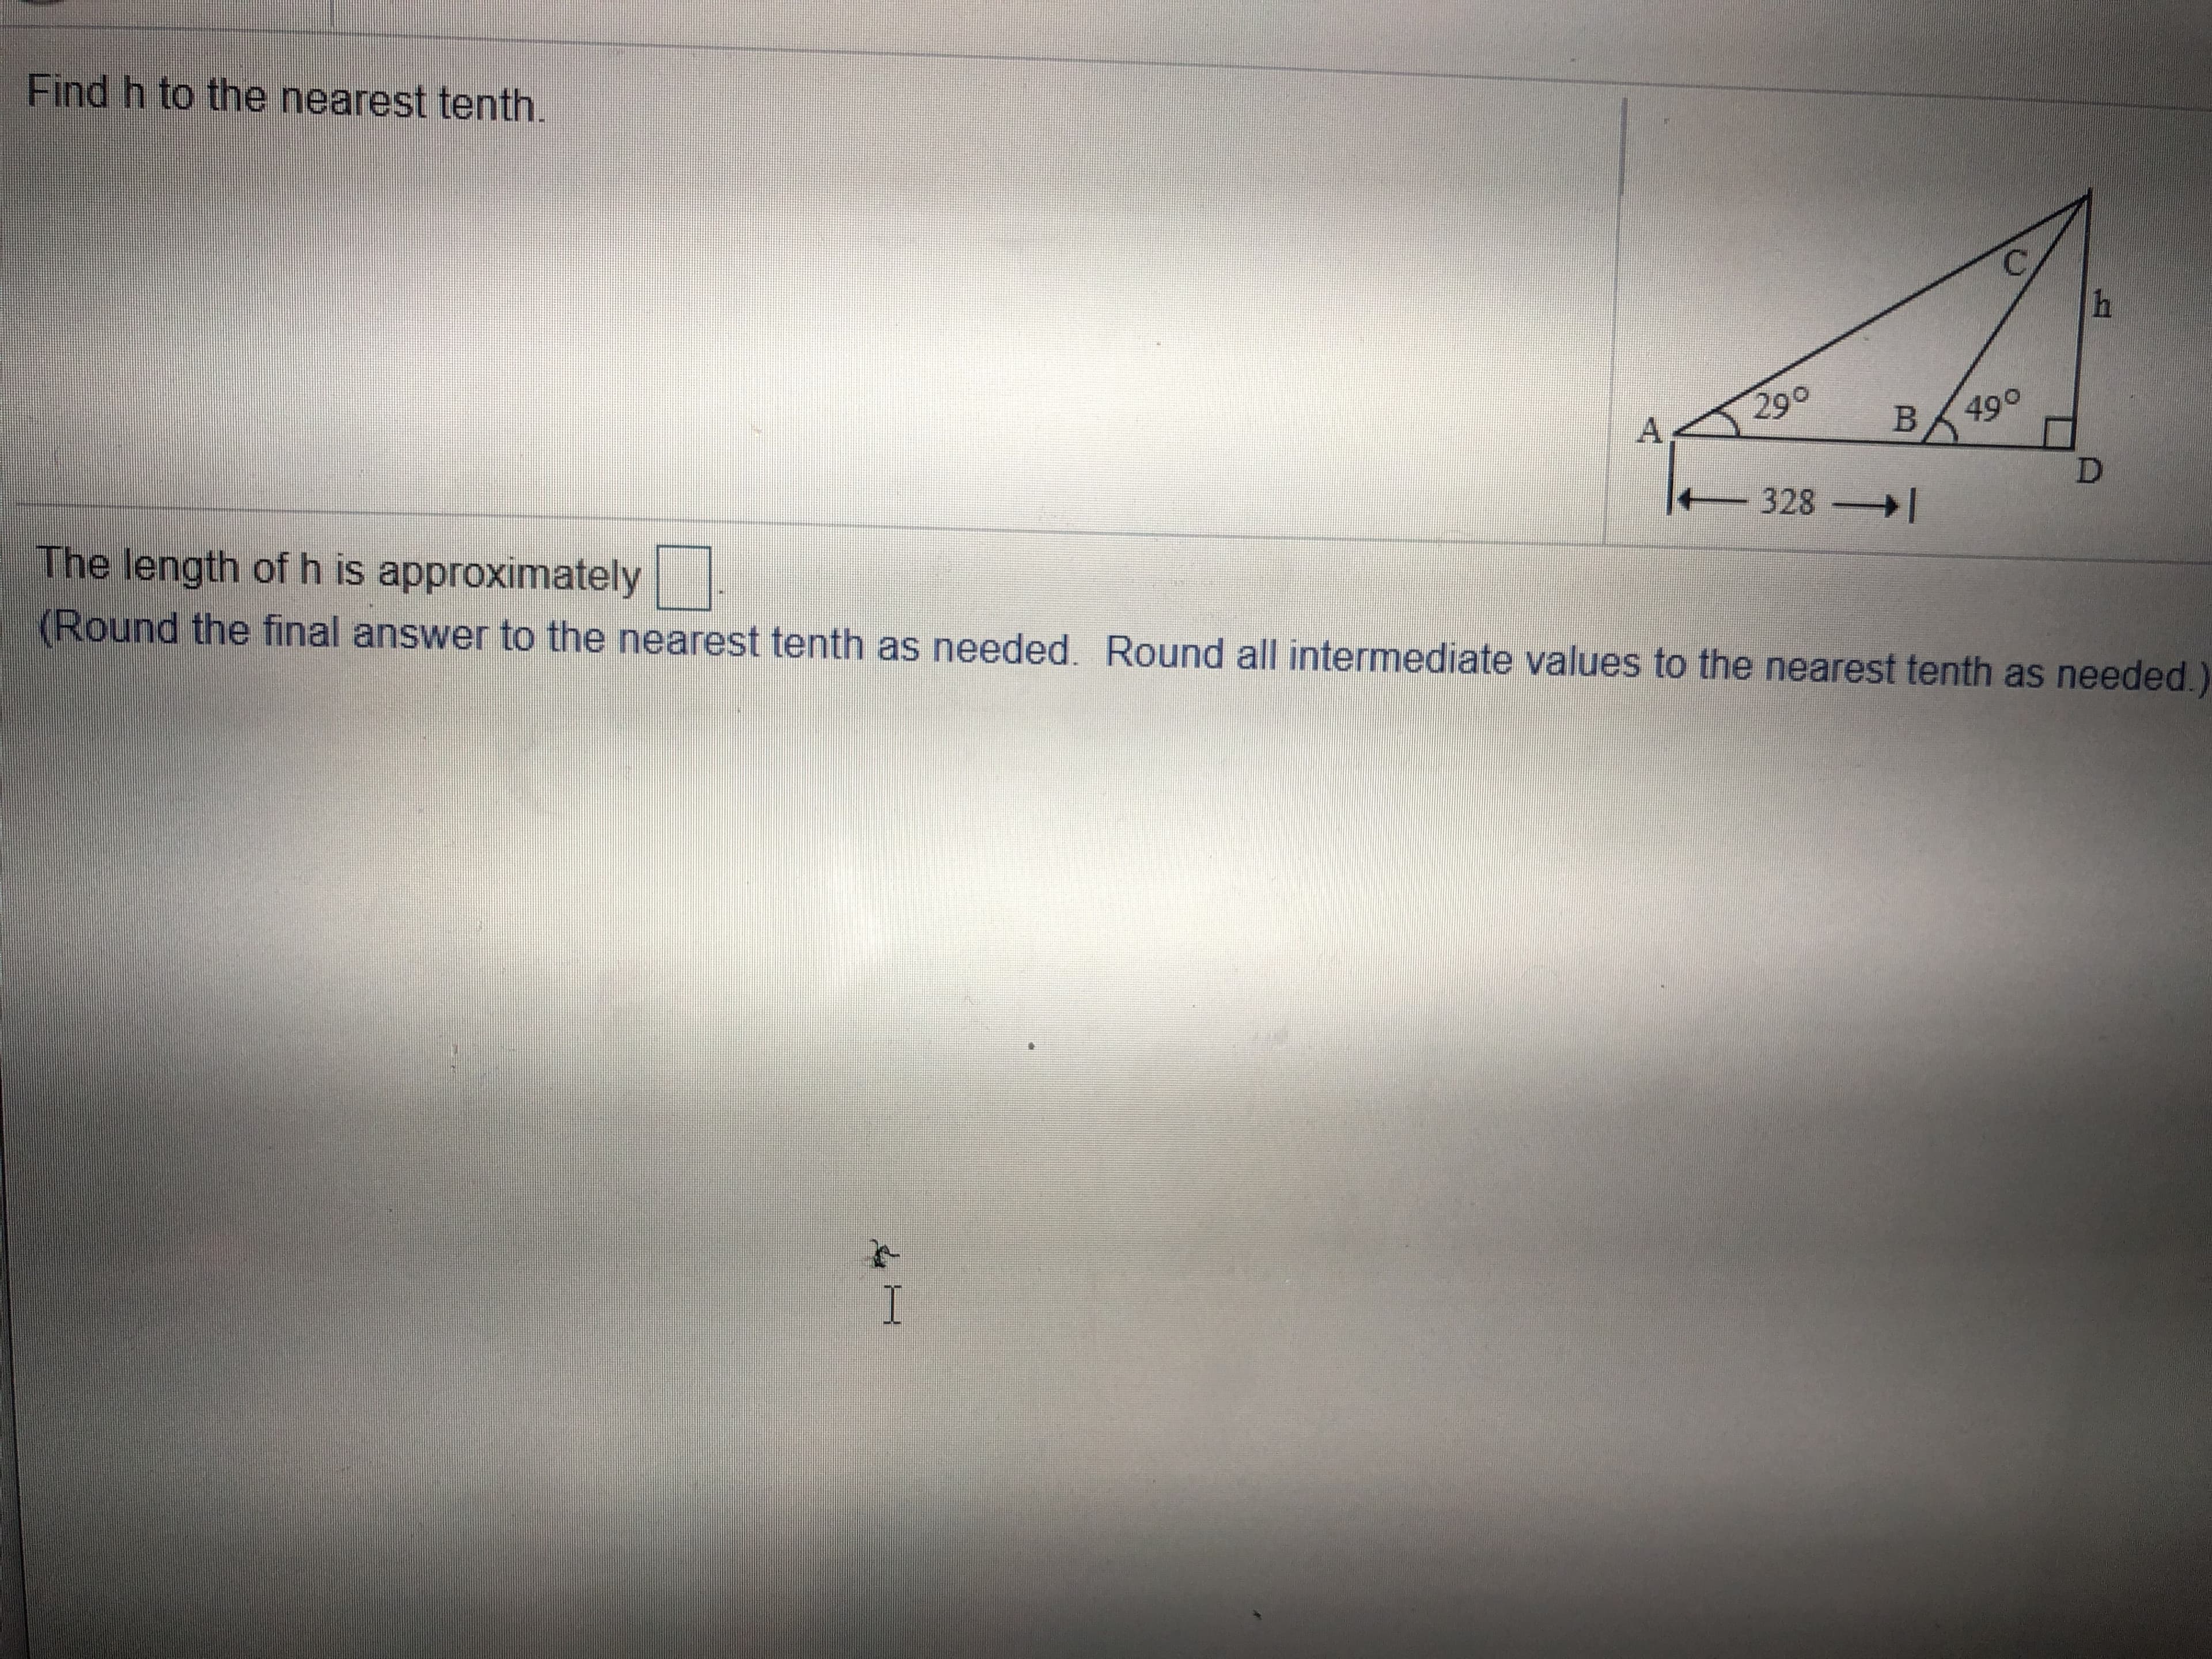 Find h to the nearest tenth.
290
B 490
A
328
The length of h is approximately
(Round the final answer to the nearest tenth as needed. Round all intermediate values to the nearest tenth as needed.)
I
